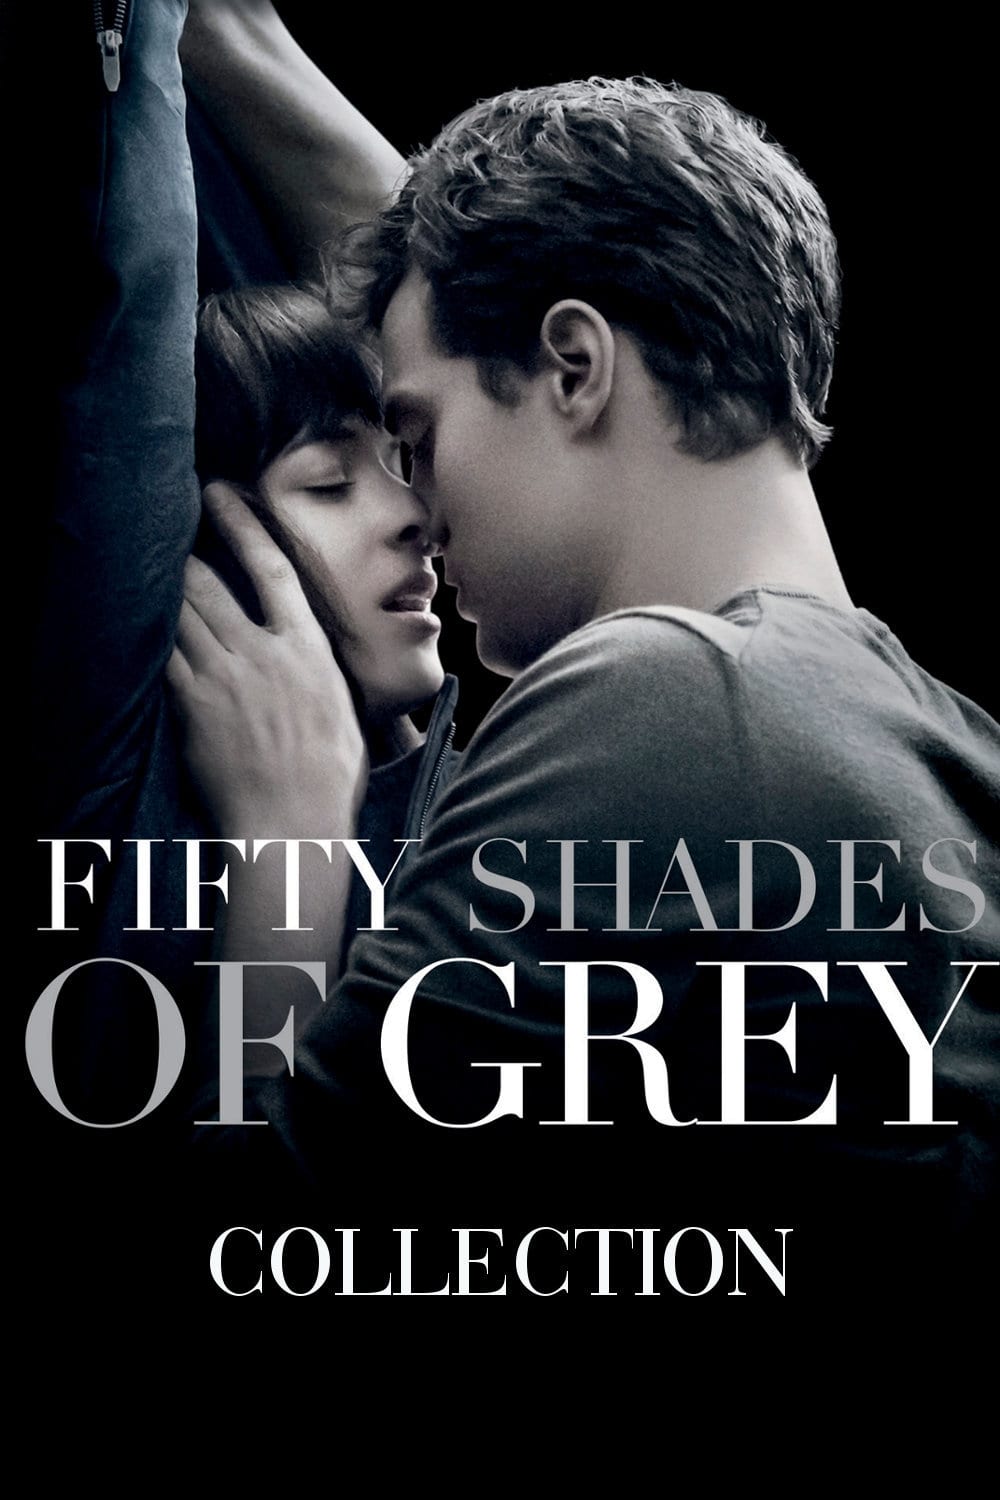 FIFTY SHADES TRILOGY Unrated HD vudu/Itunes Via Moviesanywhere